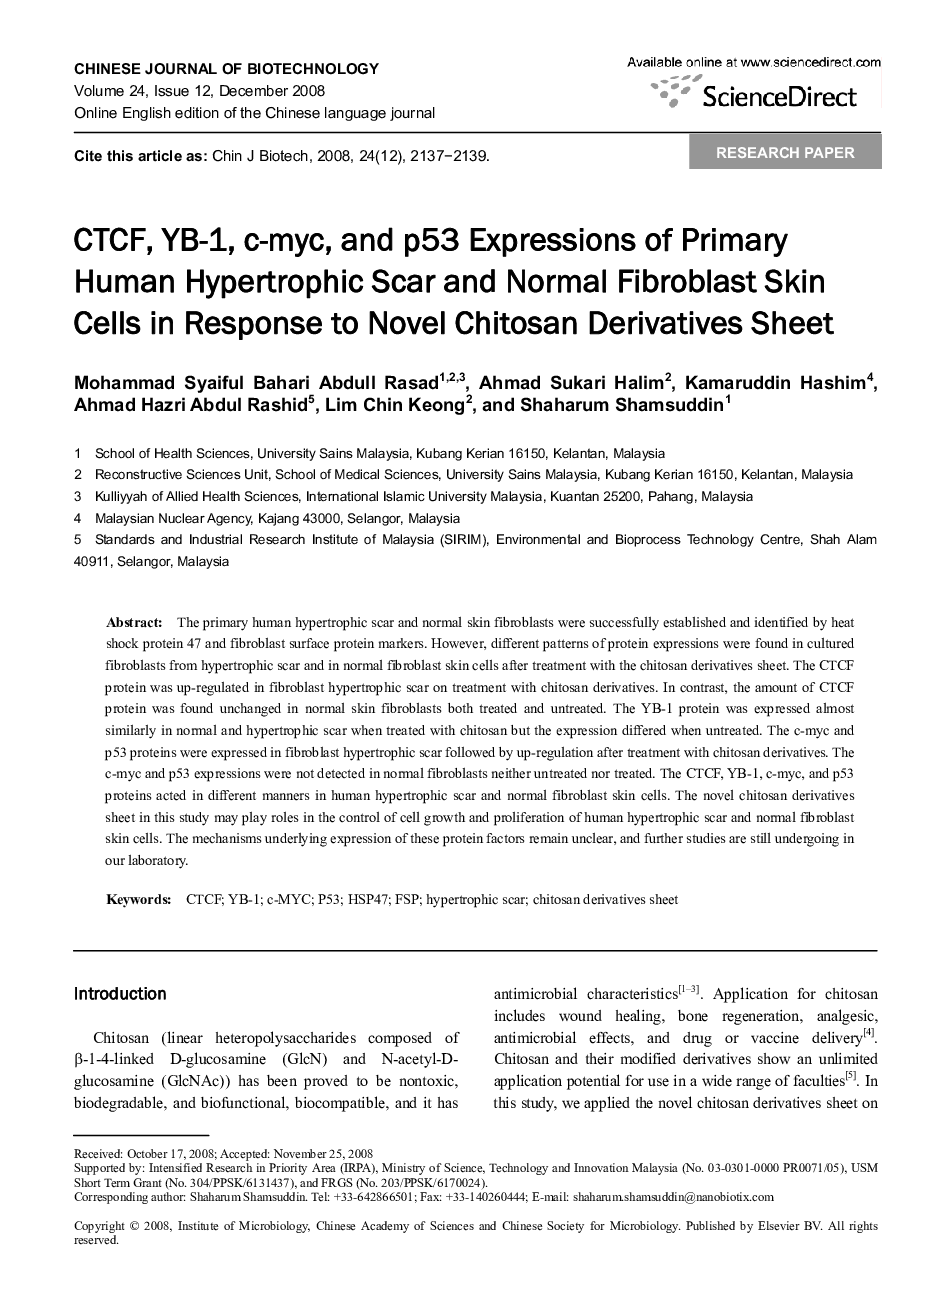 CTCF, YB-1, c-myc, and p53 Expressions of Primary Human Hypertrophic Scar and Normal Fibroblast Skin Cells in Response to Novel Chitosan Derivatives Sheet